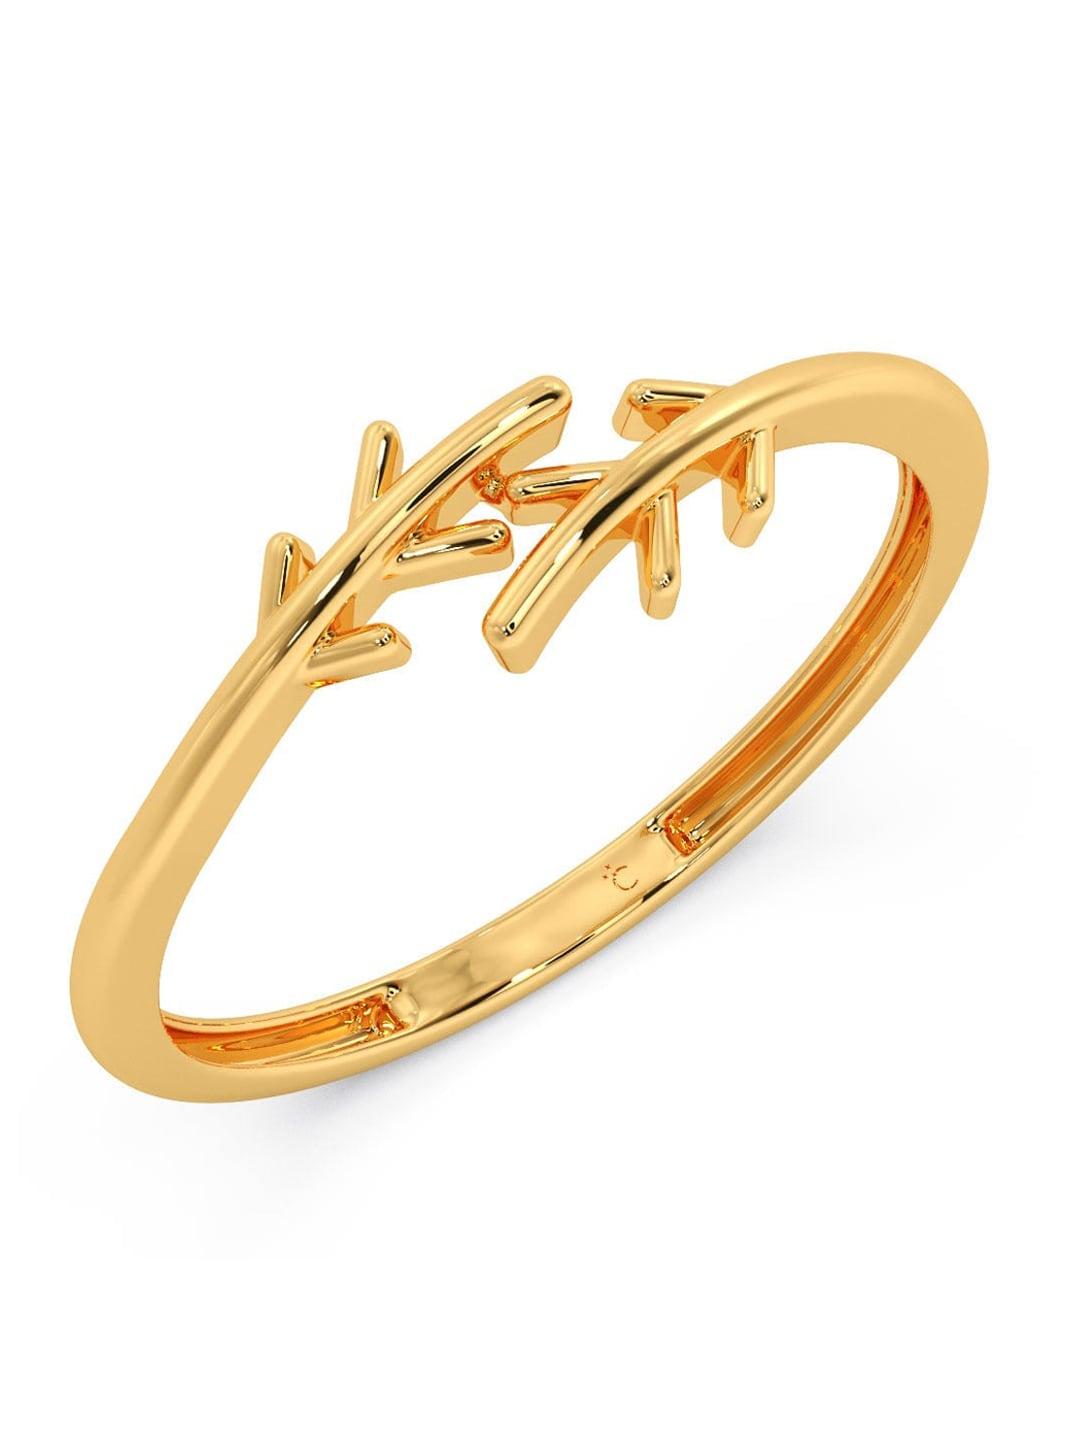 CANDERE A KALYAN JEWELLERS COMPANY 18KT Gold Ring-0.57gm